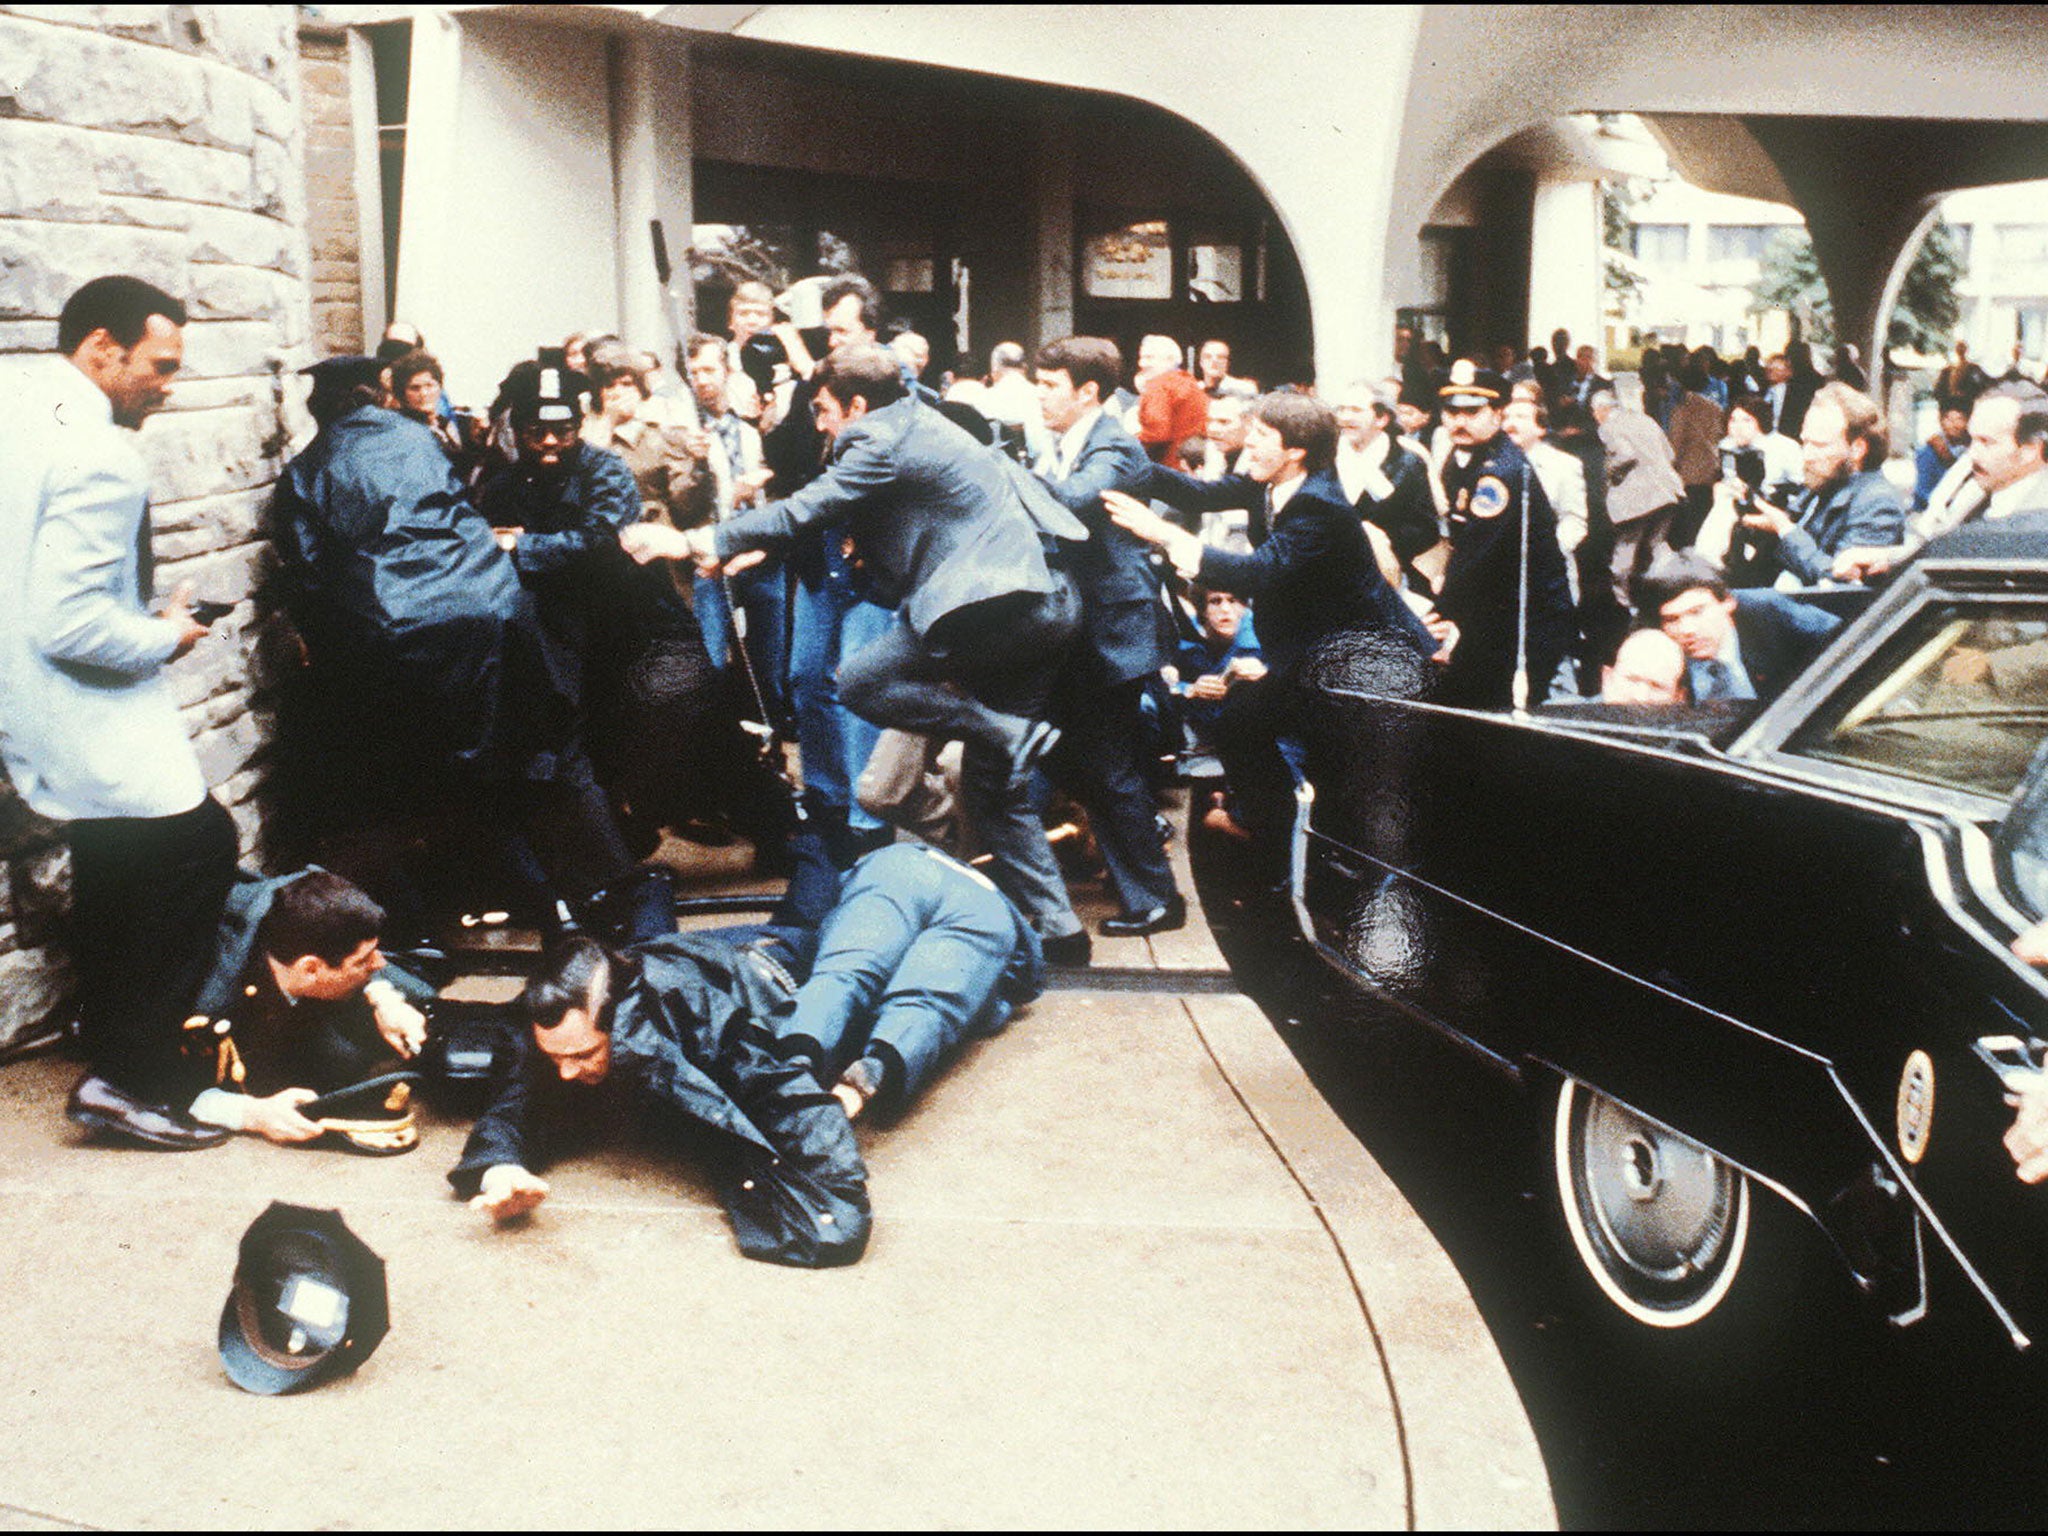 The Hilton Hotel in Washington, DC, shows police and Secret Service agents reacting during the assassination attempt on then US president Ronald Reagan